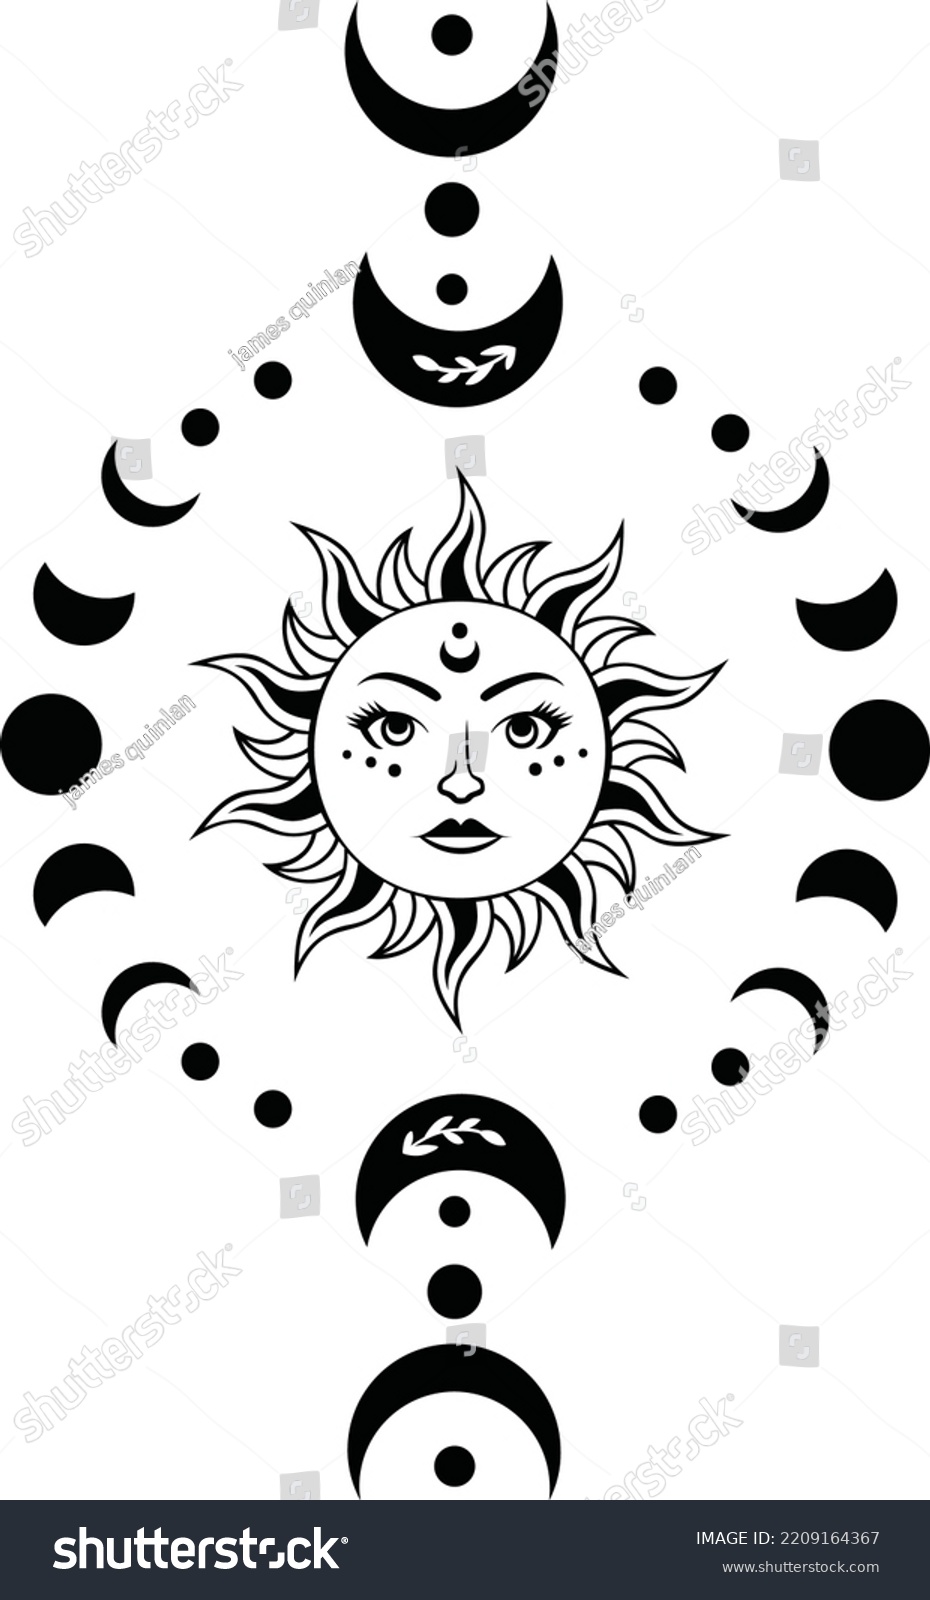 SVG of Sun with face surrounded by phases of the moon design. svg